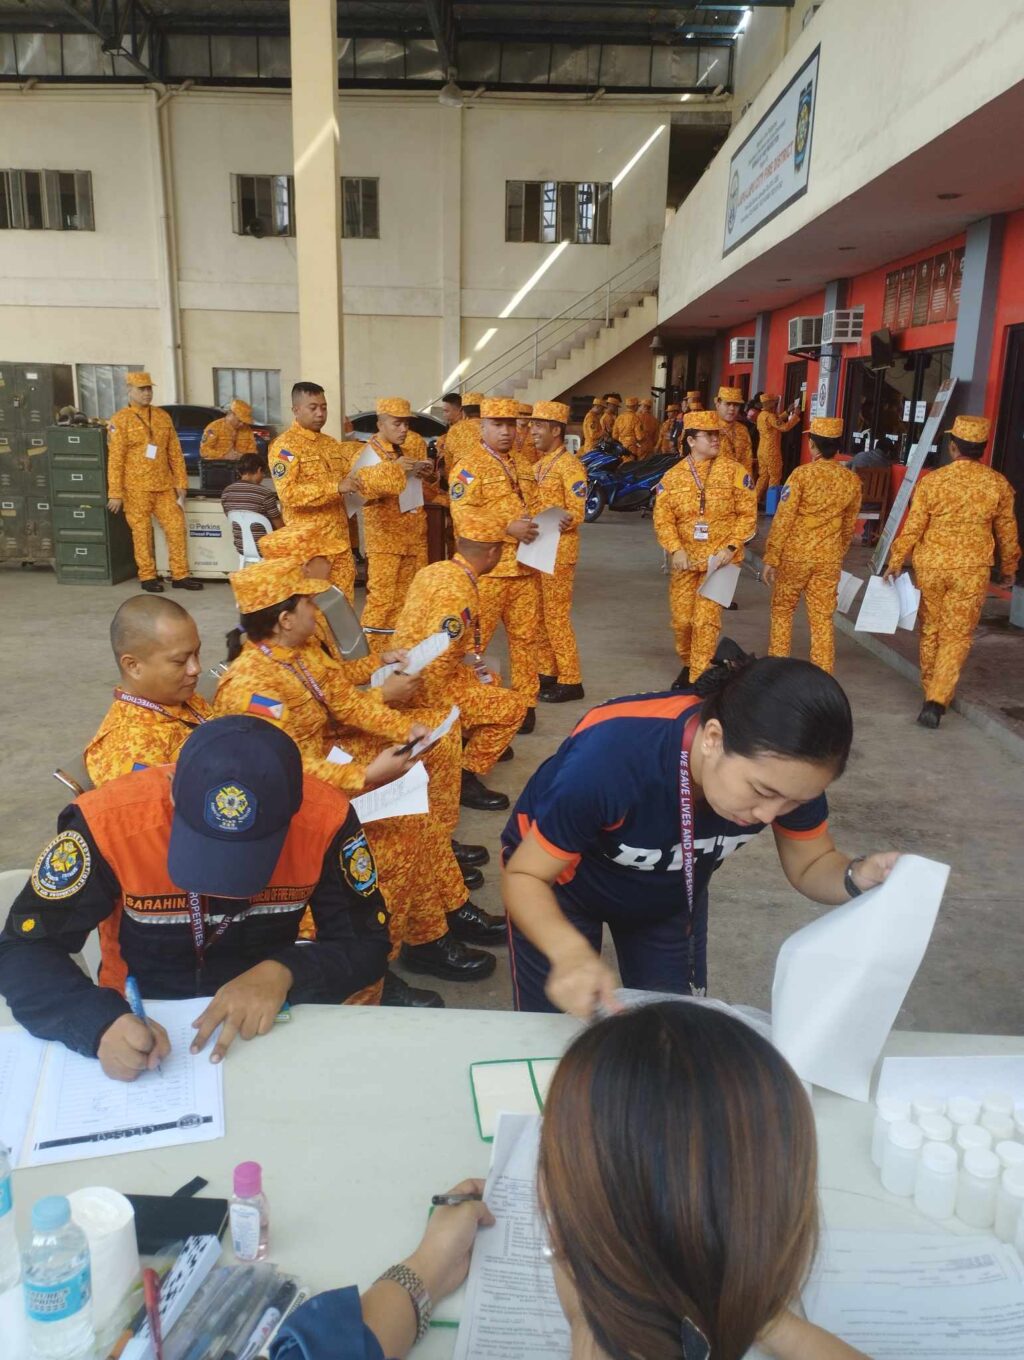 Garry Lao, Closap head, says drug tests of all 114 firefighters of the Lapu-Lapu Fire District turned out negative of drug use. | Futch Anthony Inso